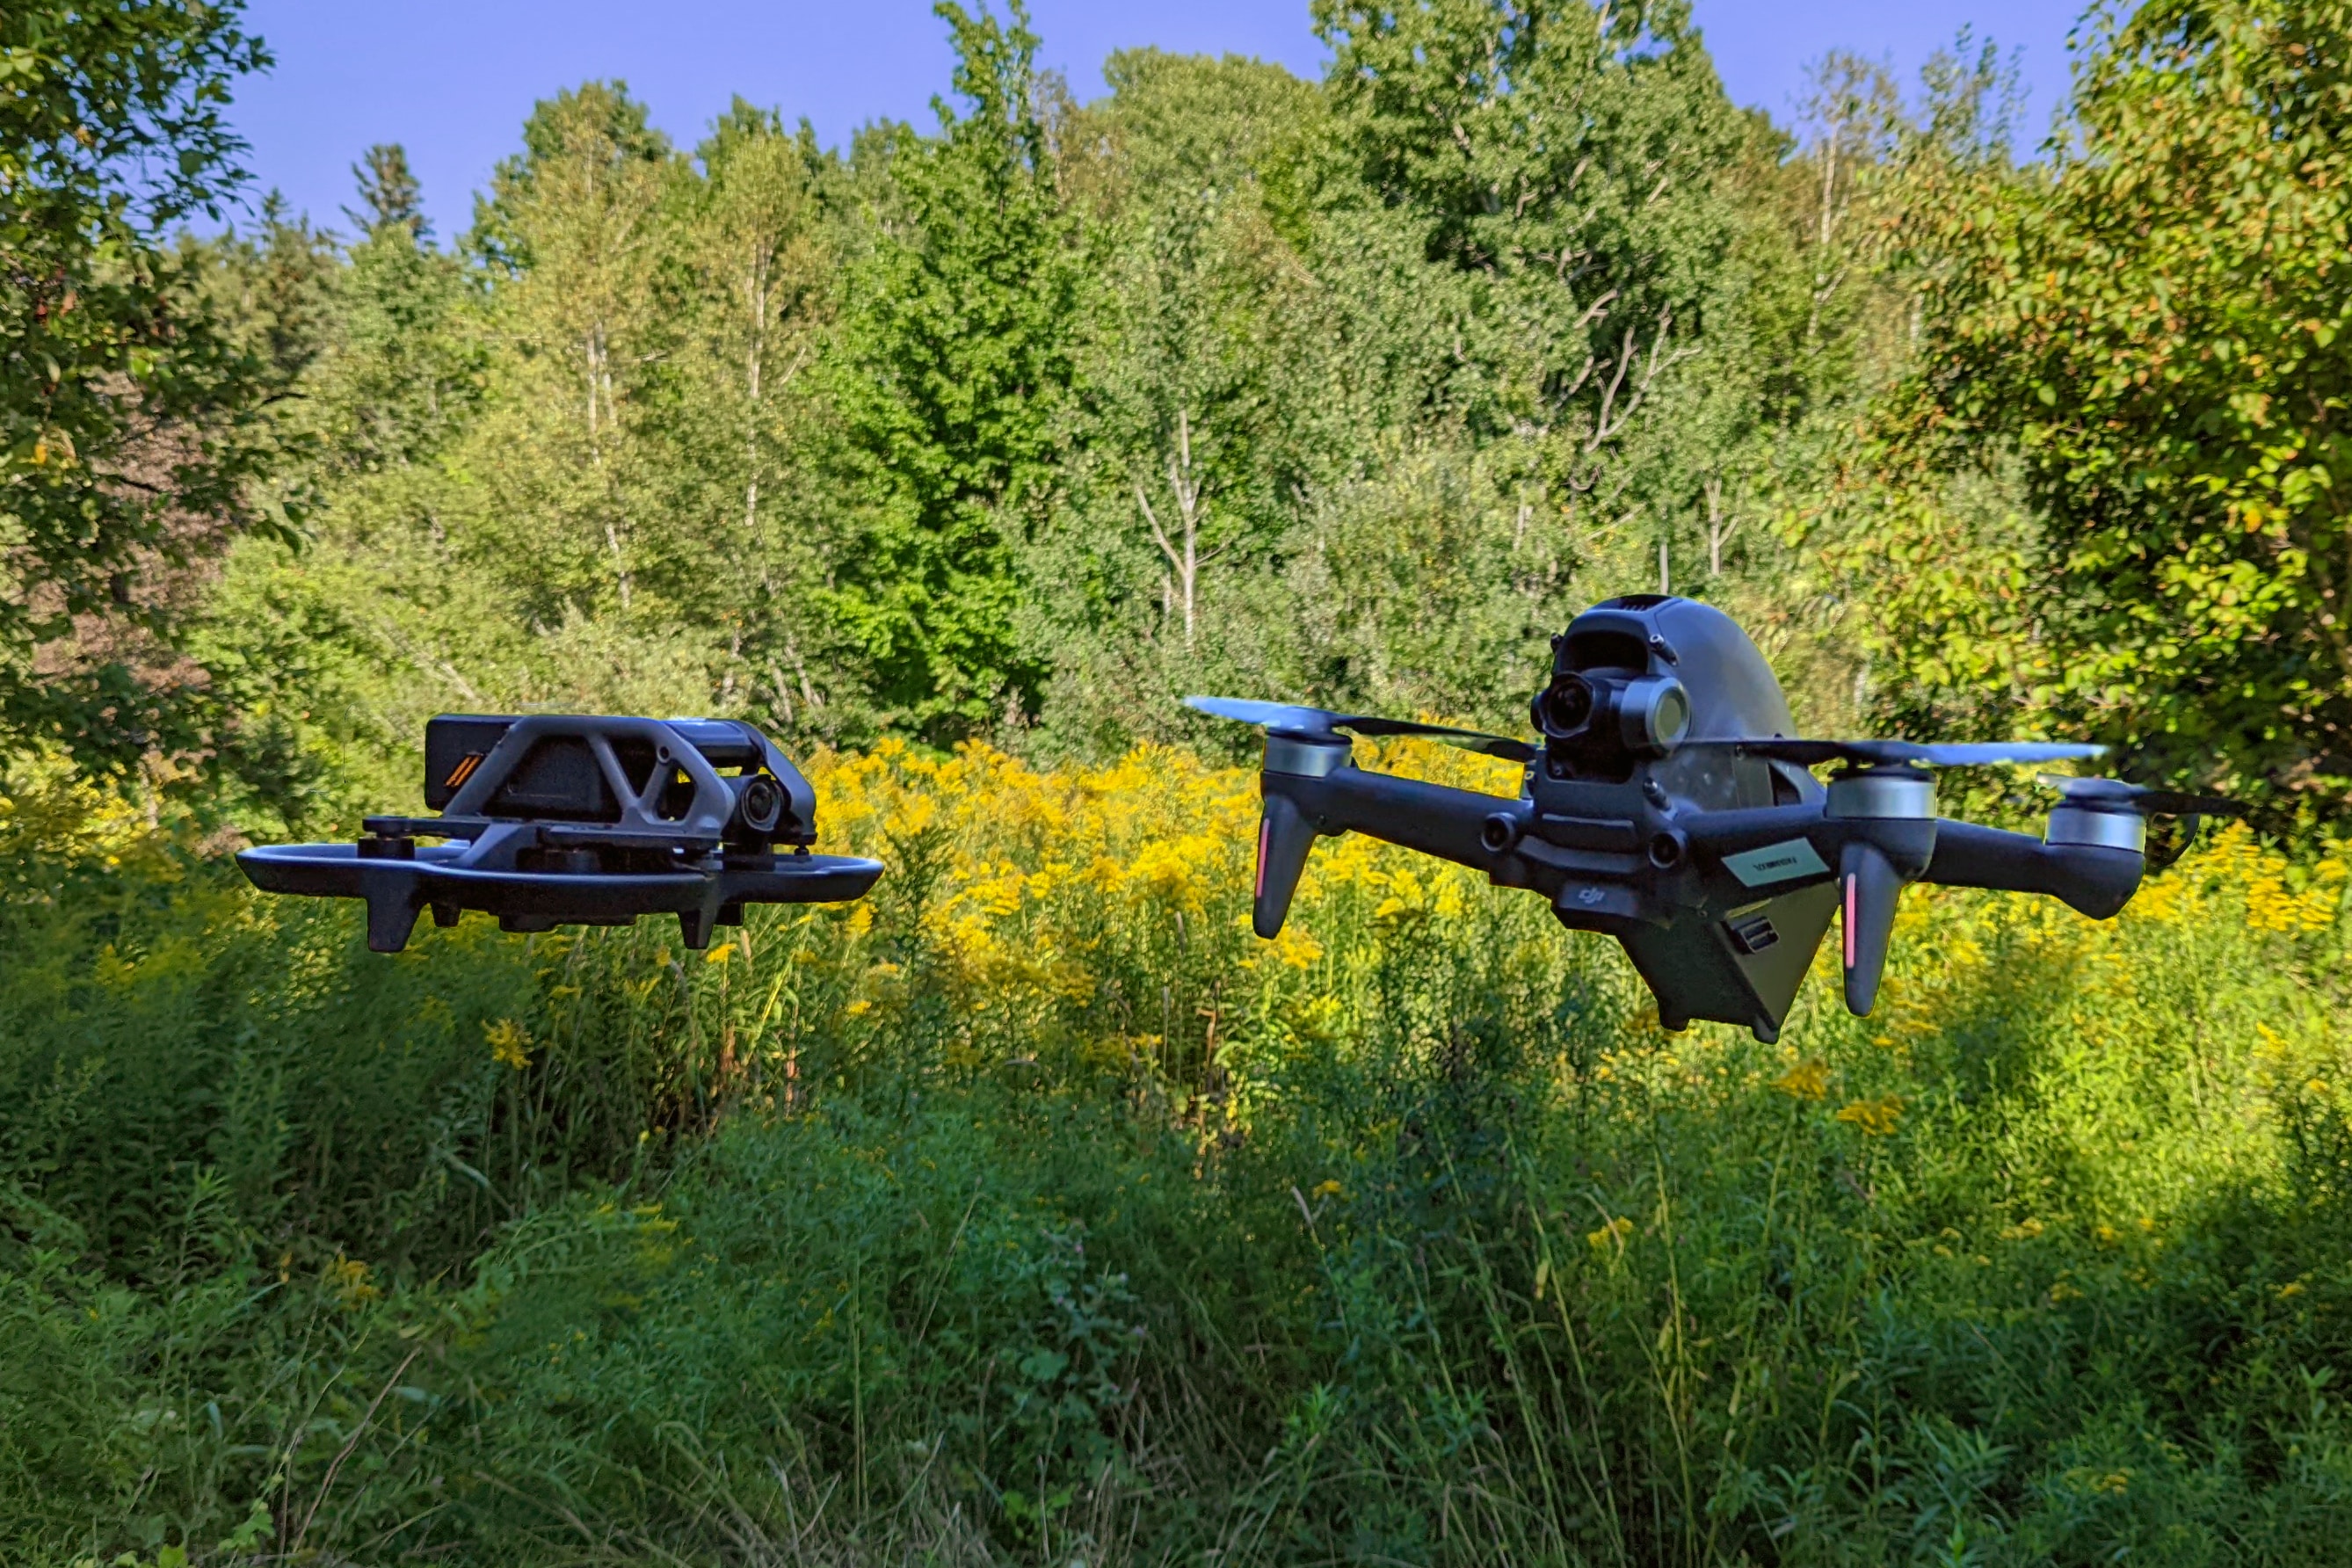 5 Things I Love About The DJI Avata, Full Video Inside